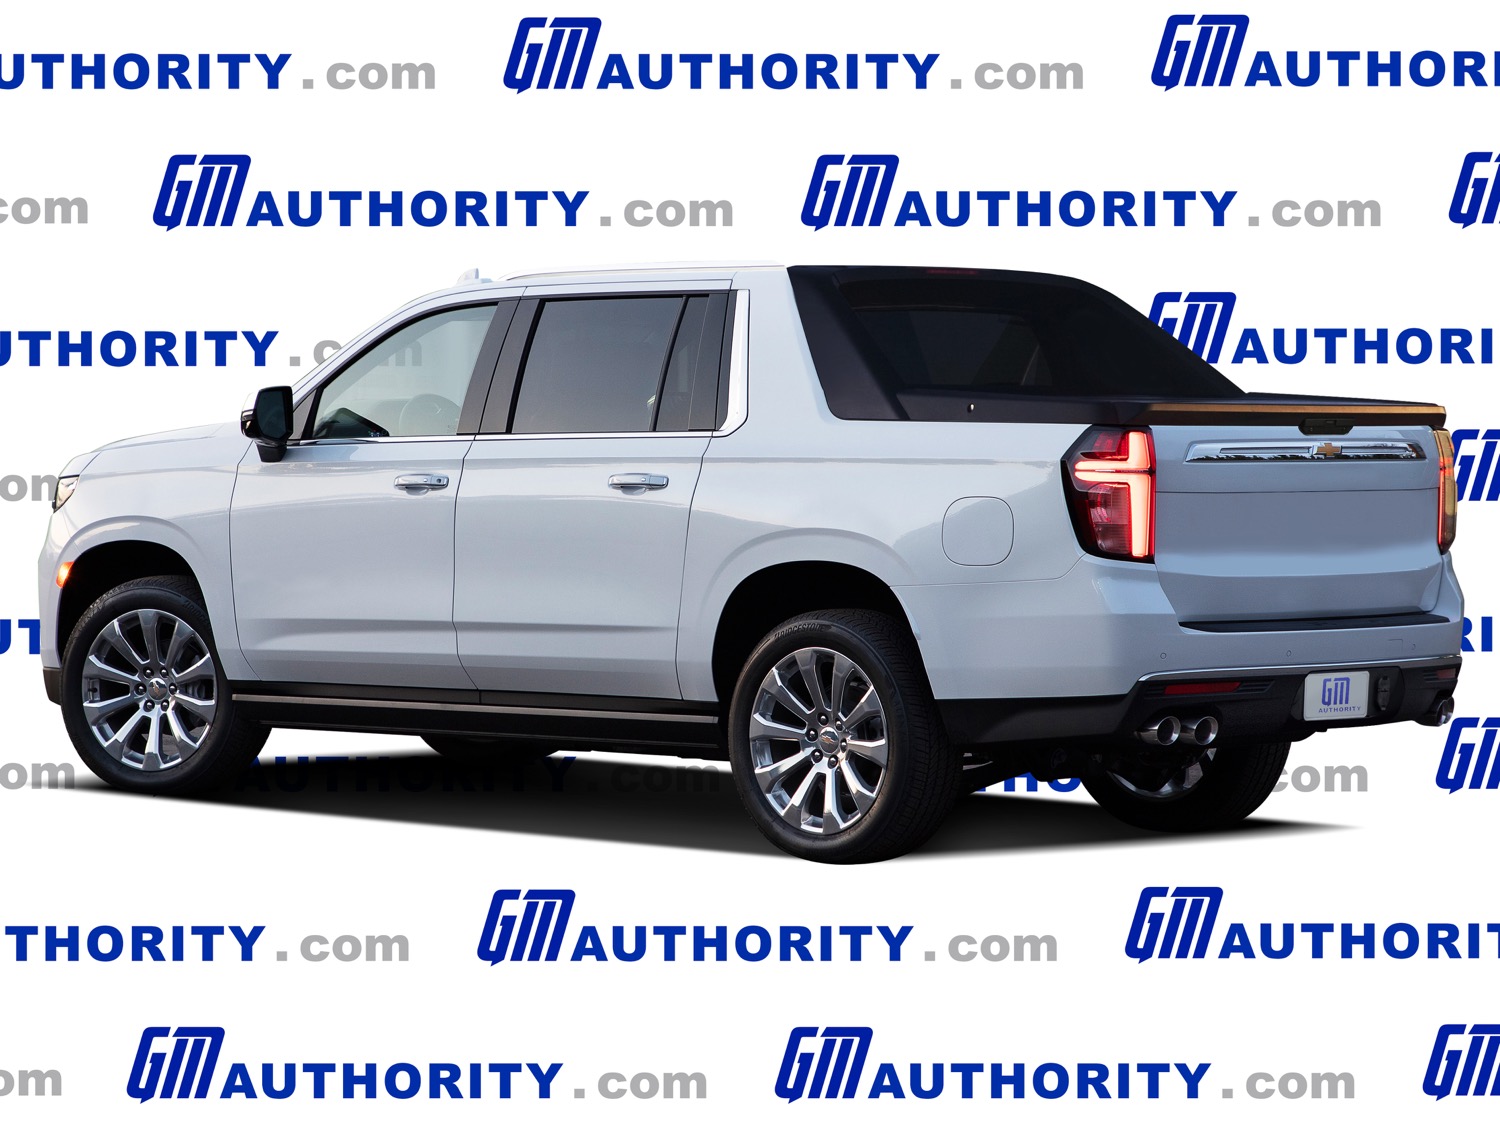 21 Chevrolet Avalanche Rendered Gm Authority